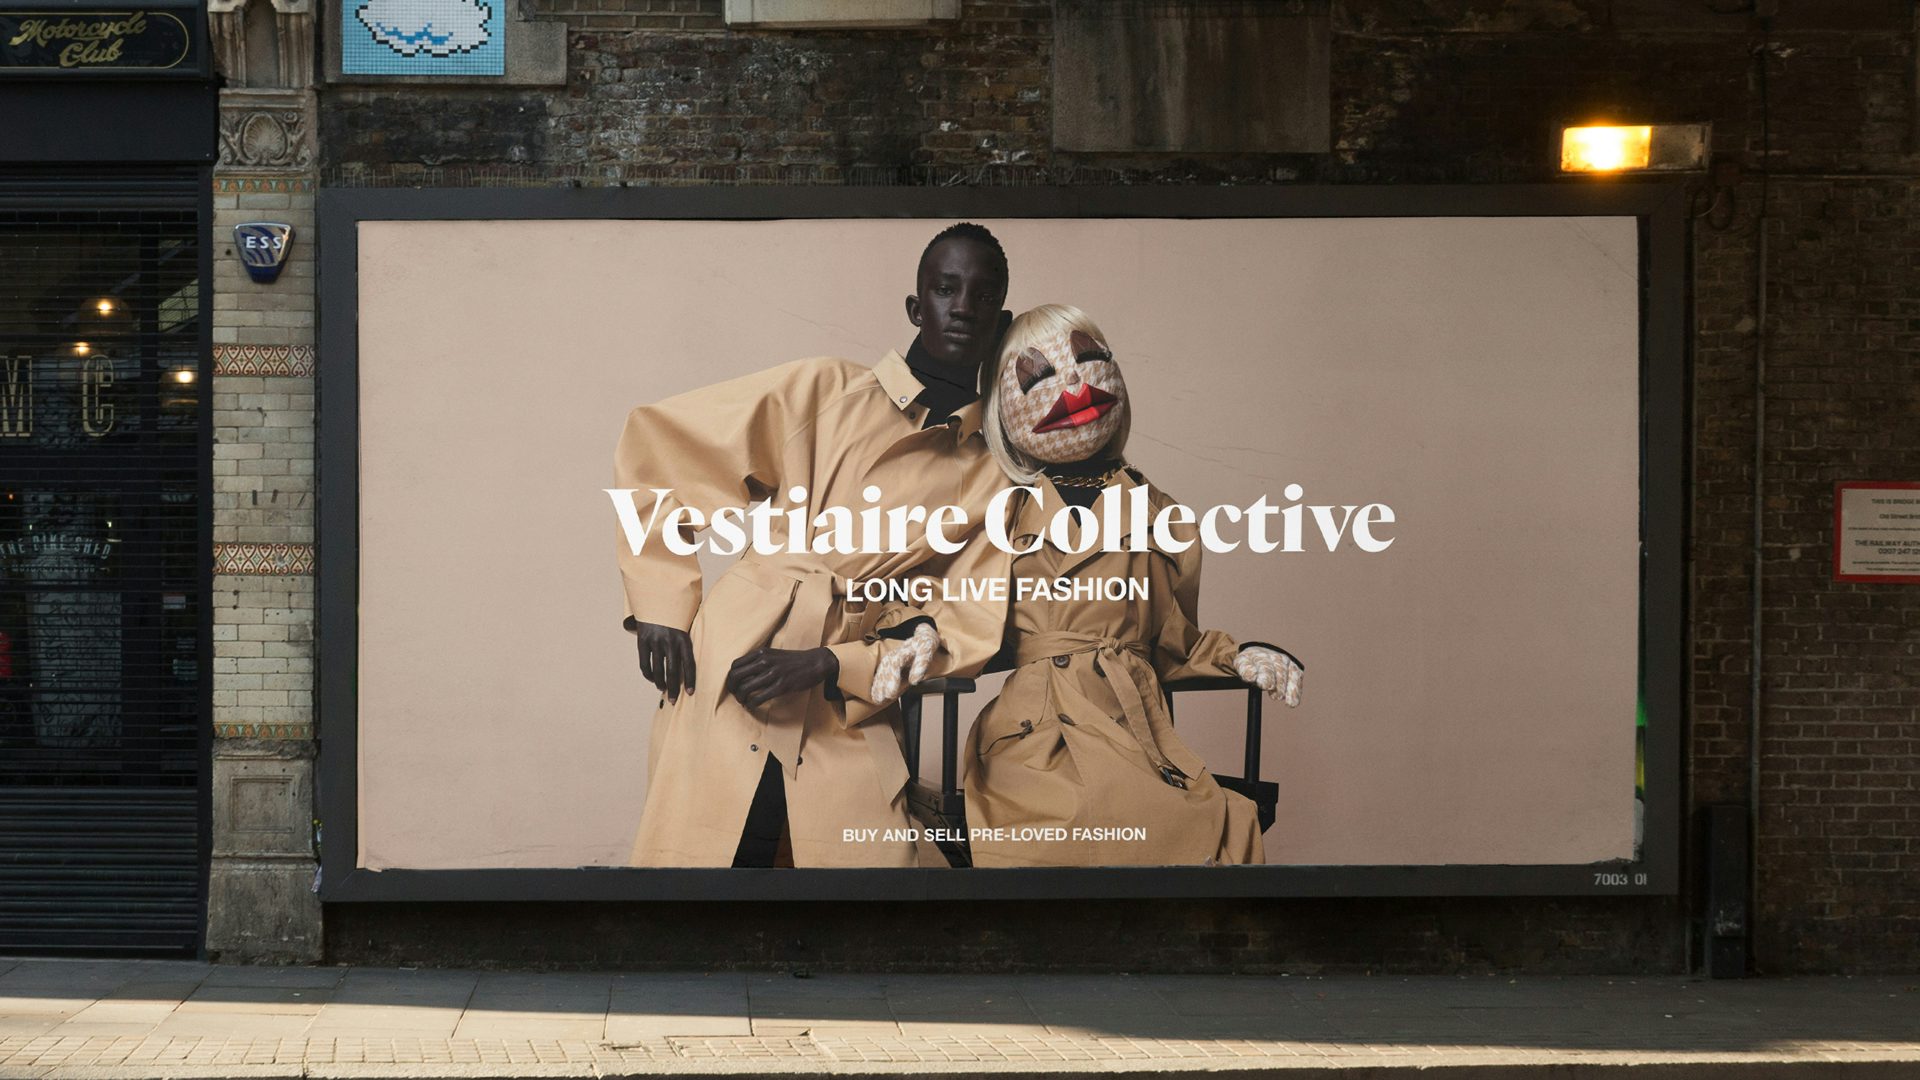 Puppets take to the catwalk in Vestiaire Collective's new ad